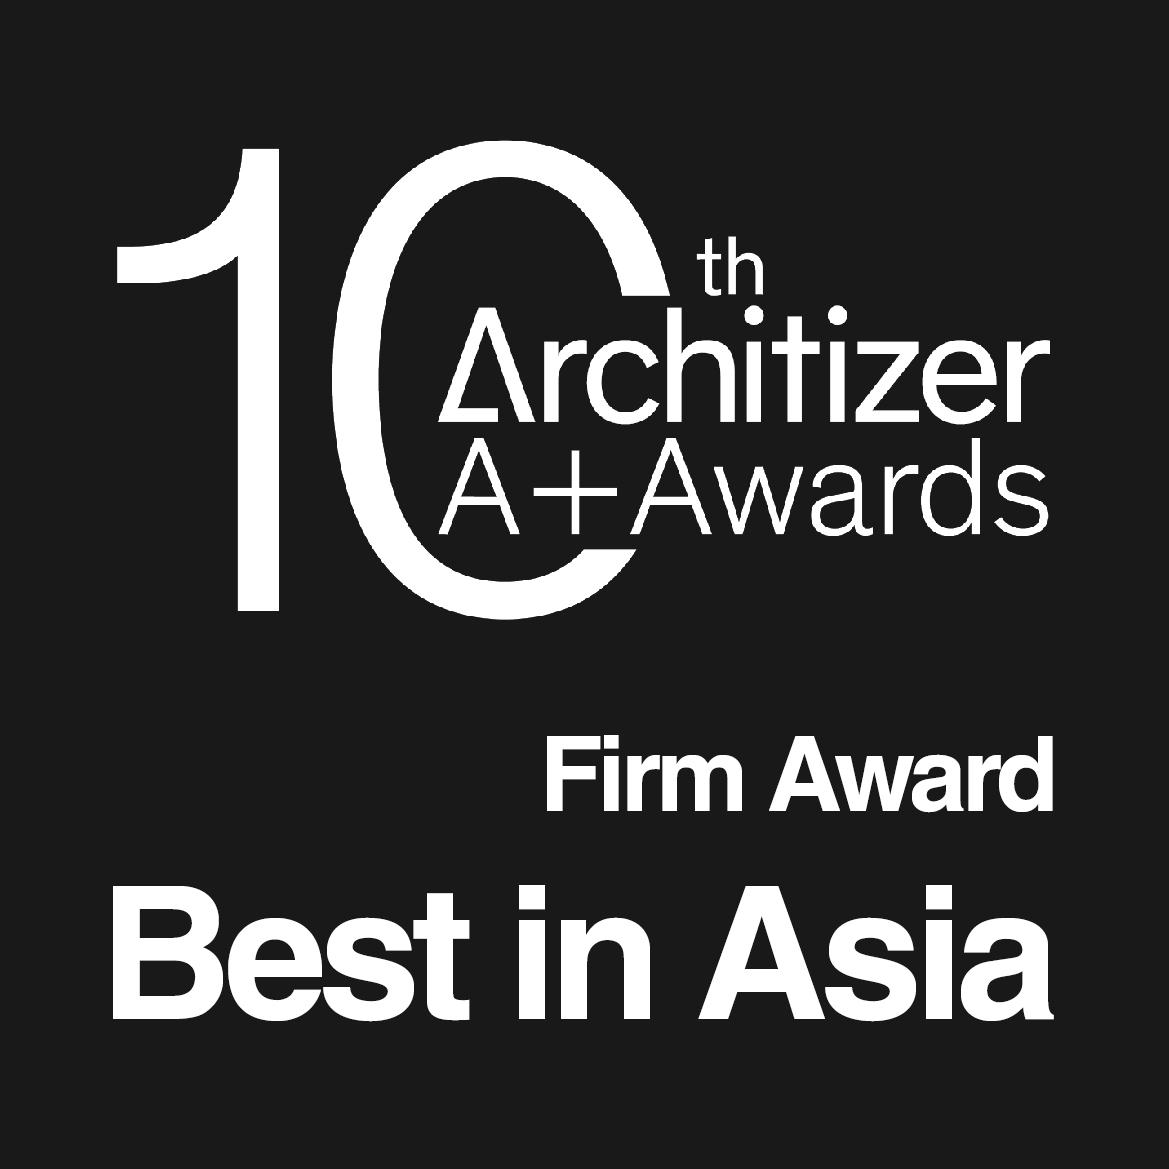 KRIS YAO | ARTECH has received an Architizer A+ Firm award - Best in Asia.